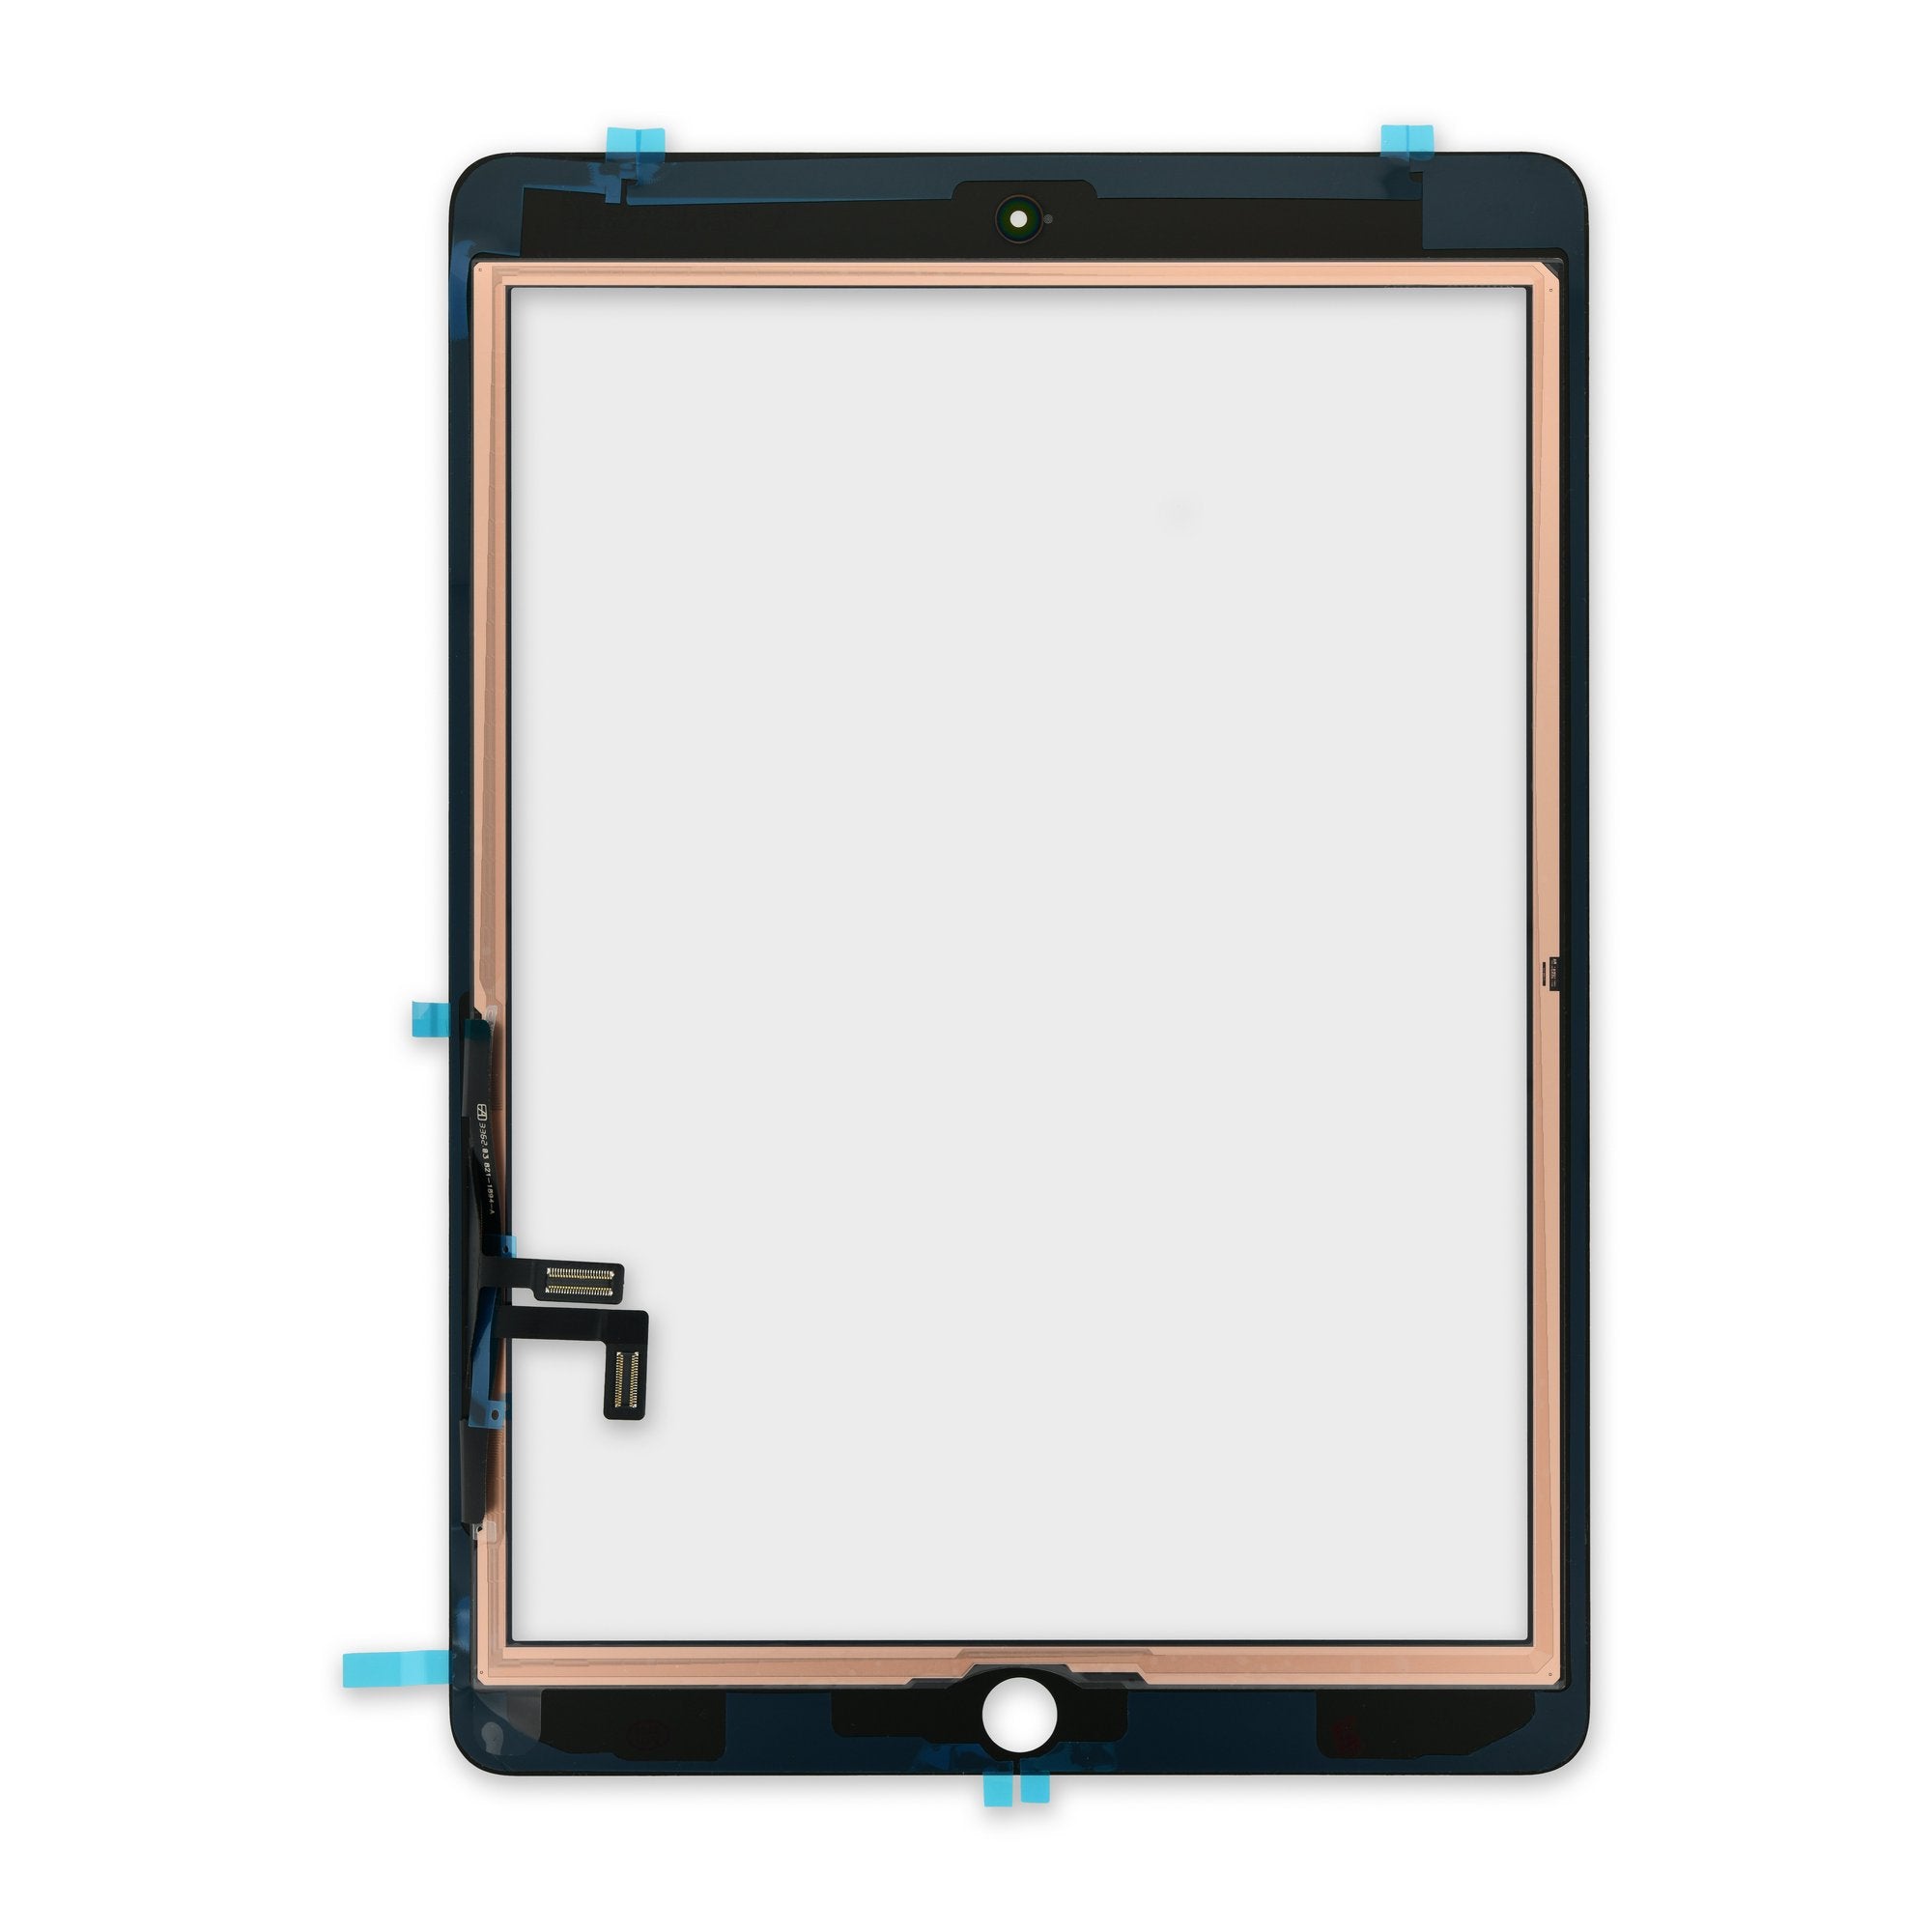 A1822 A1823 Screen Replacement, for iPad 2017 5th Generation Touch Screen  9.7 inch Digiziter Touchscreen Glass Panel with Home Button & Repair Tools